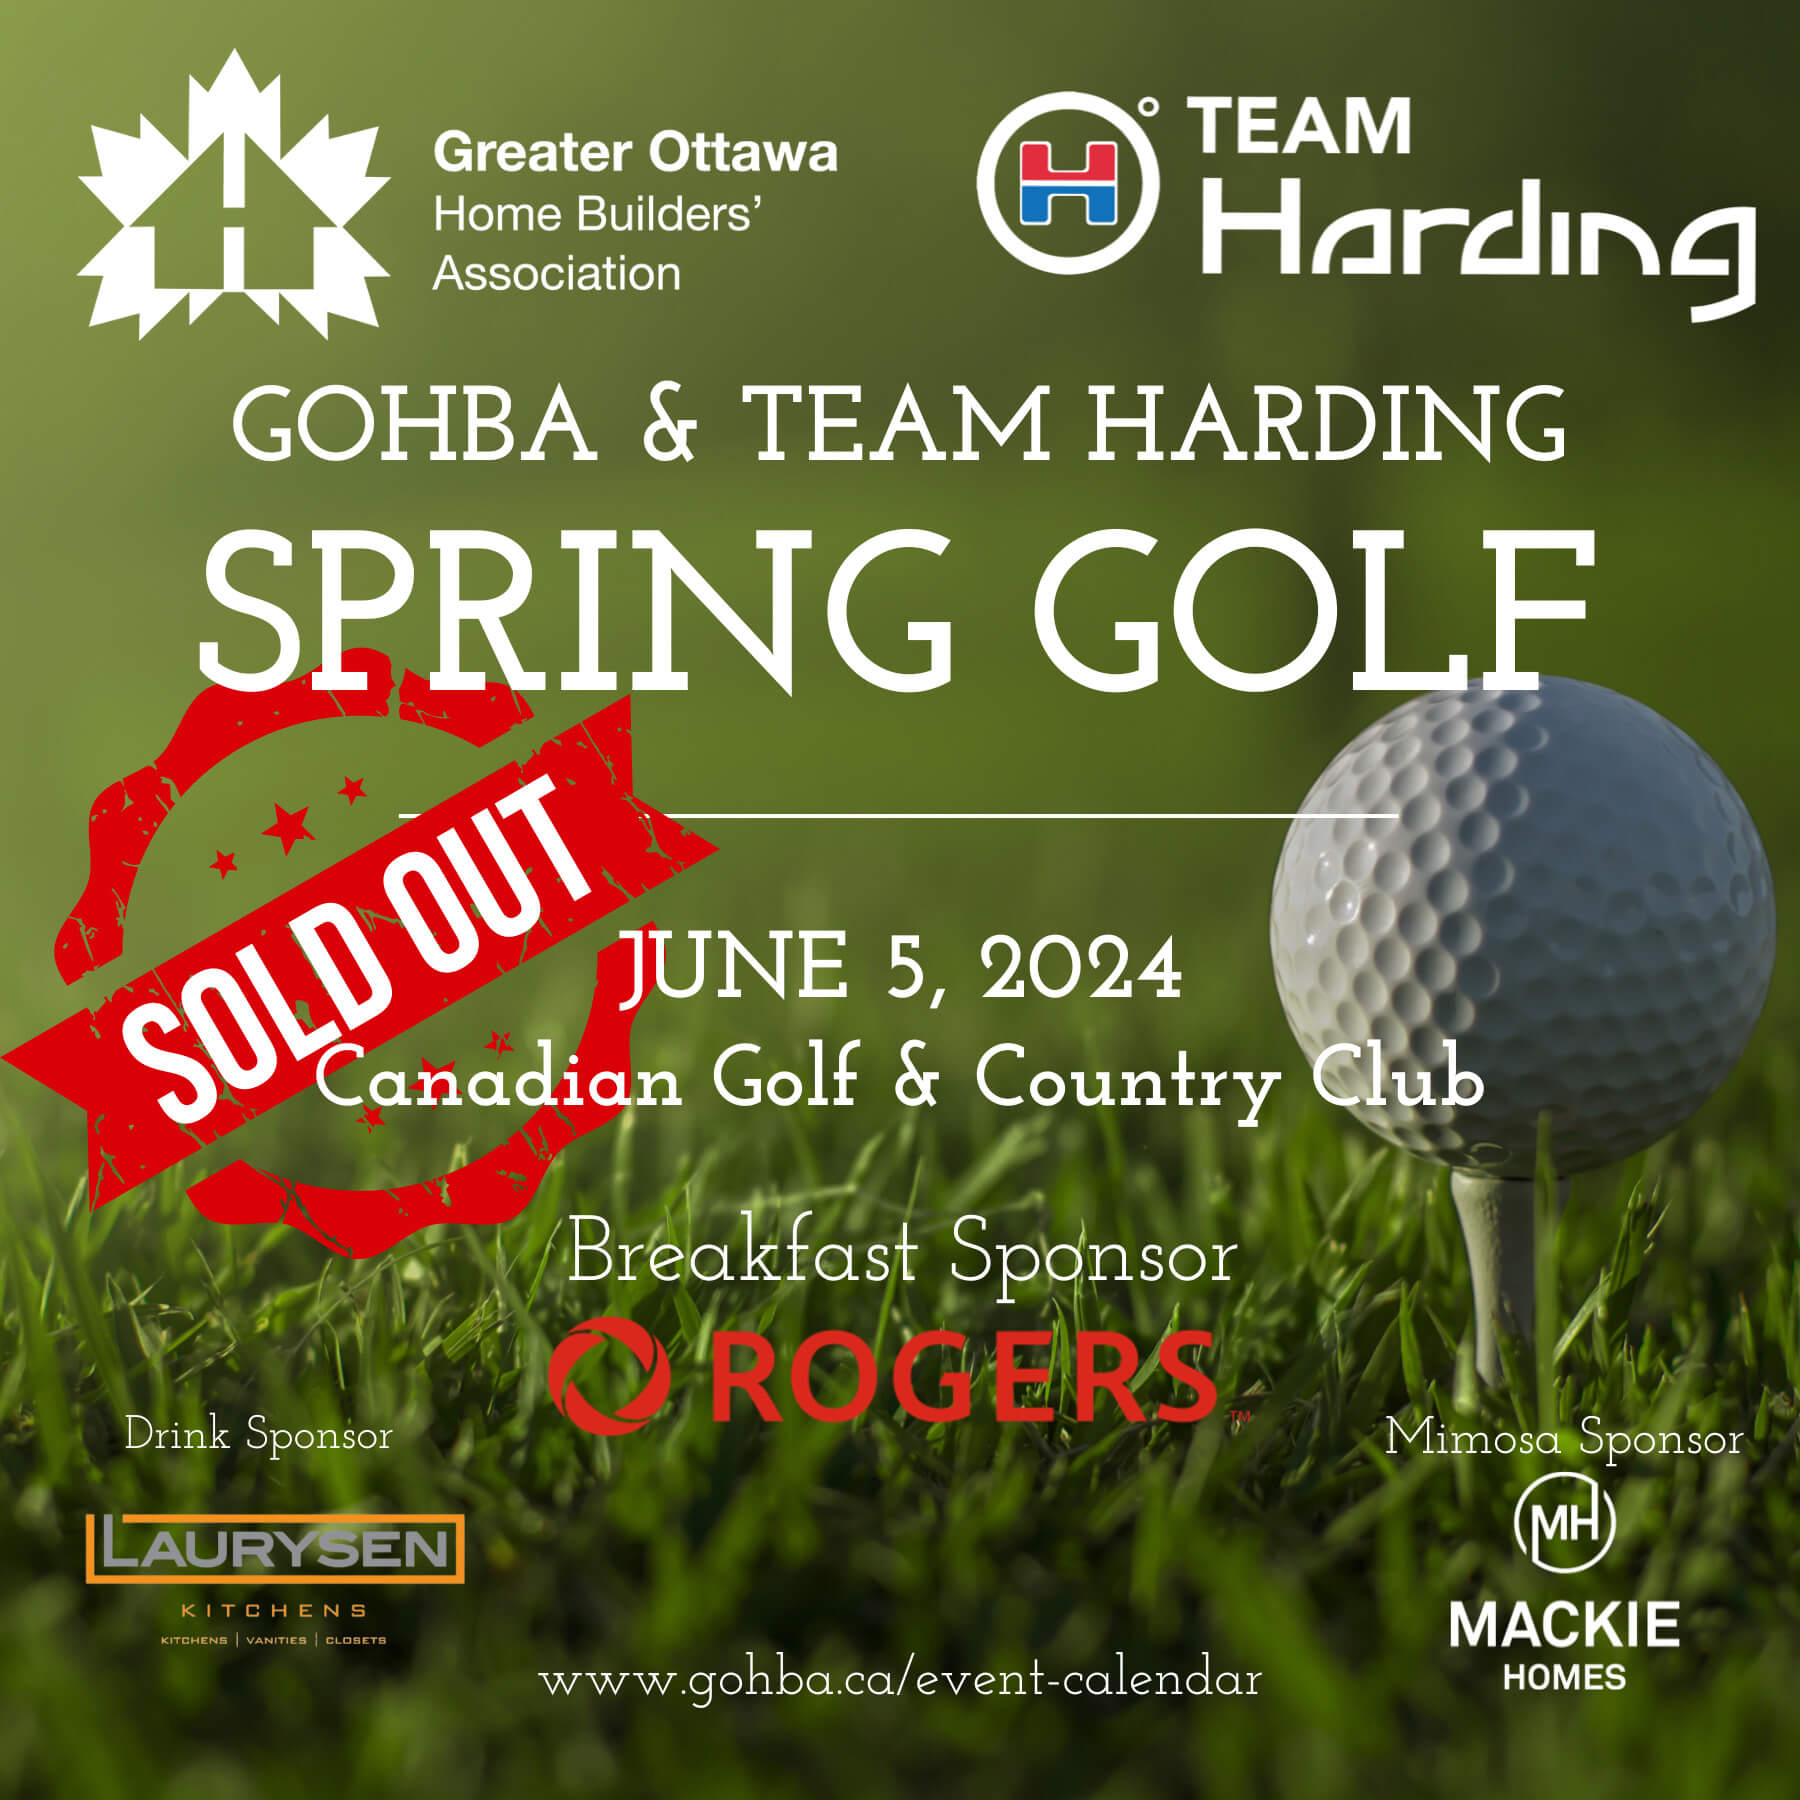 SPRING GOLF 2024 sold out